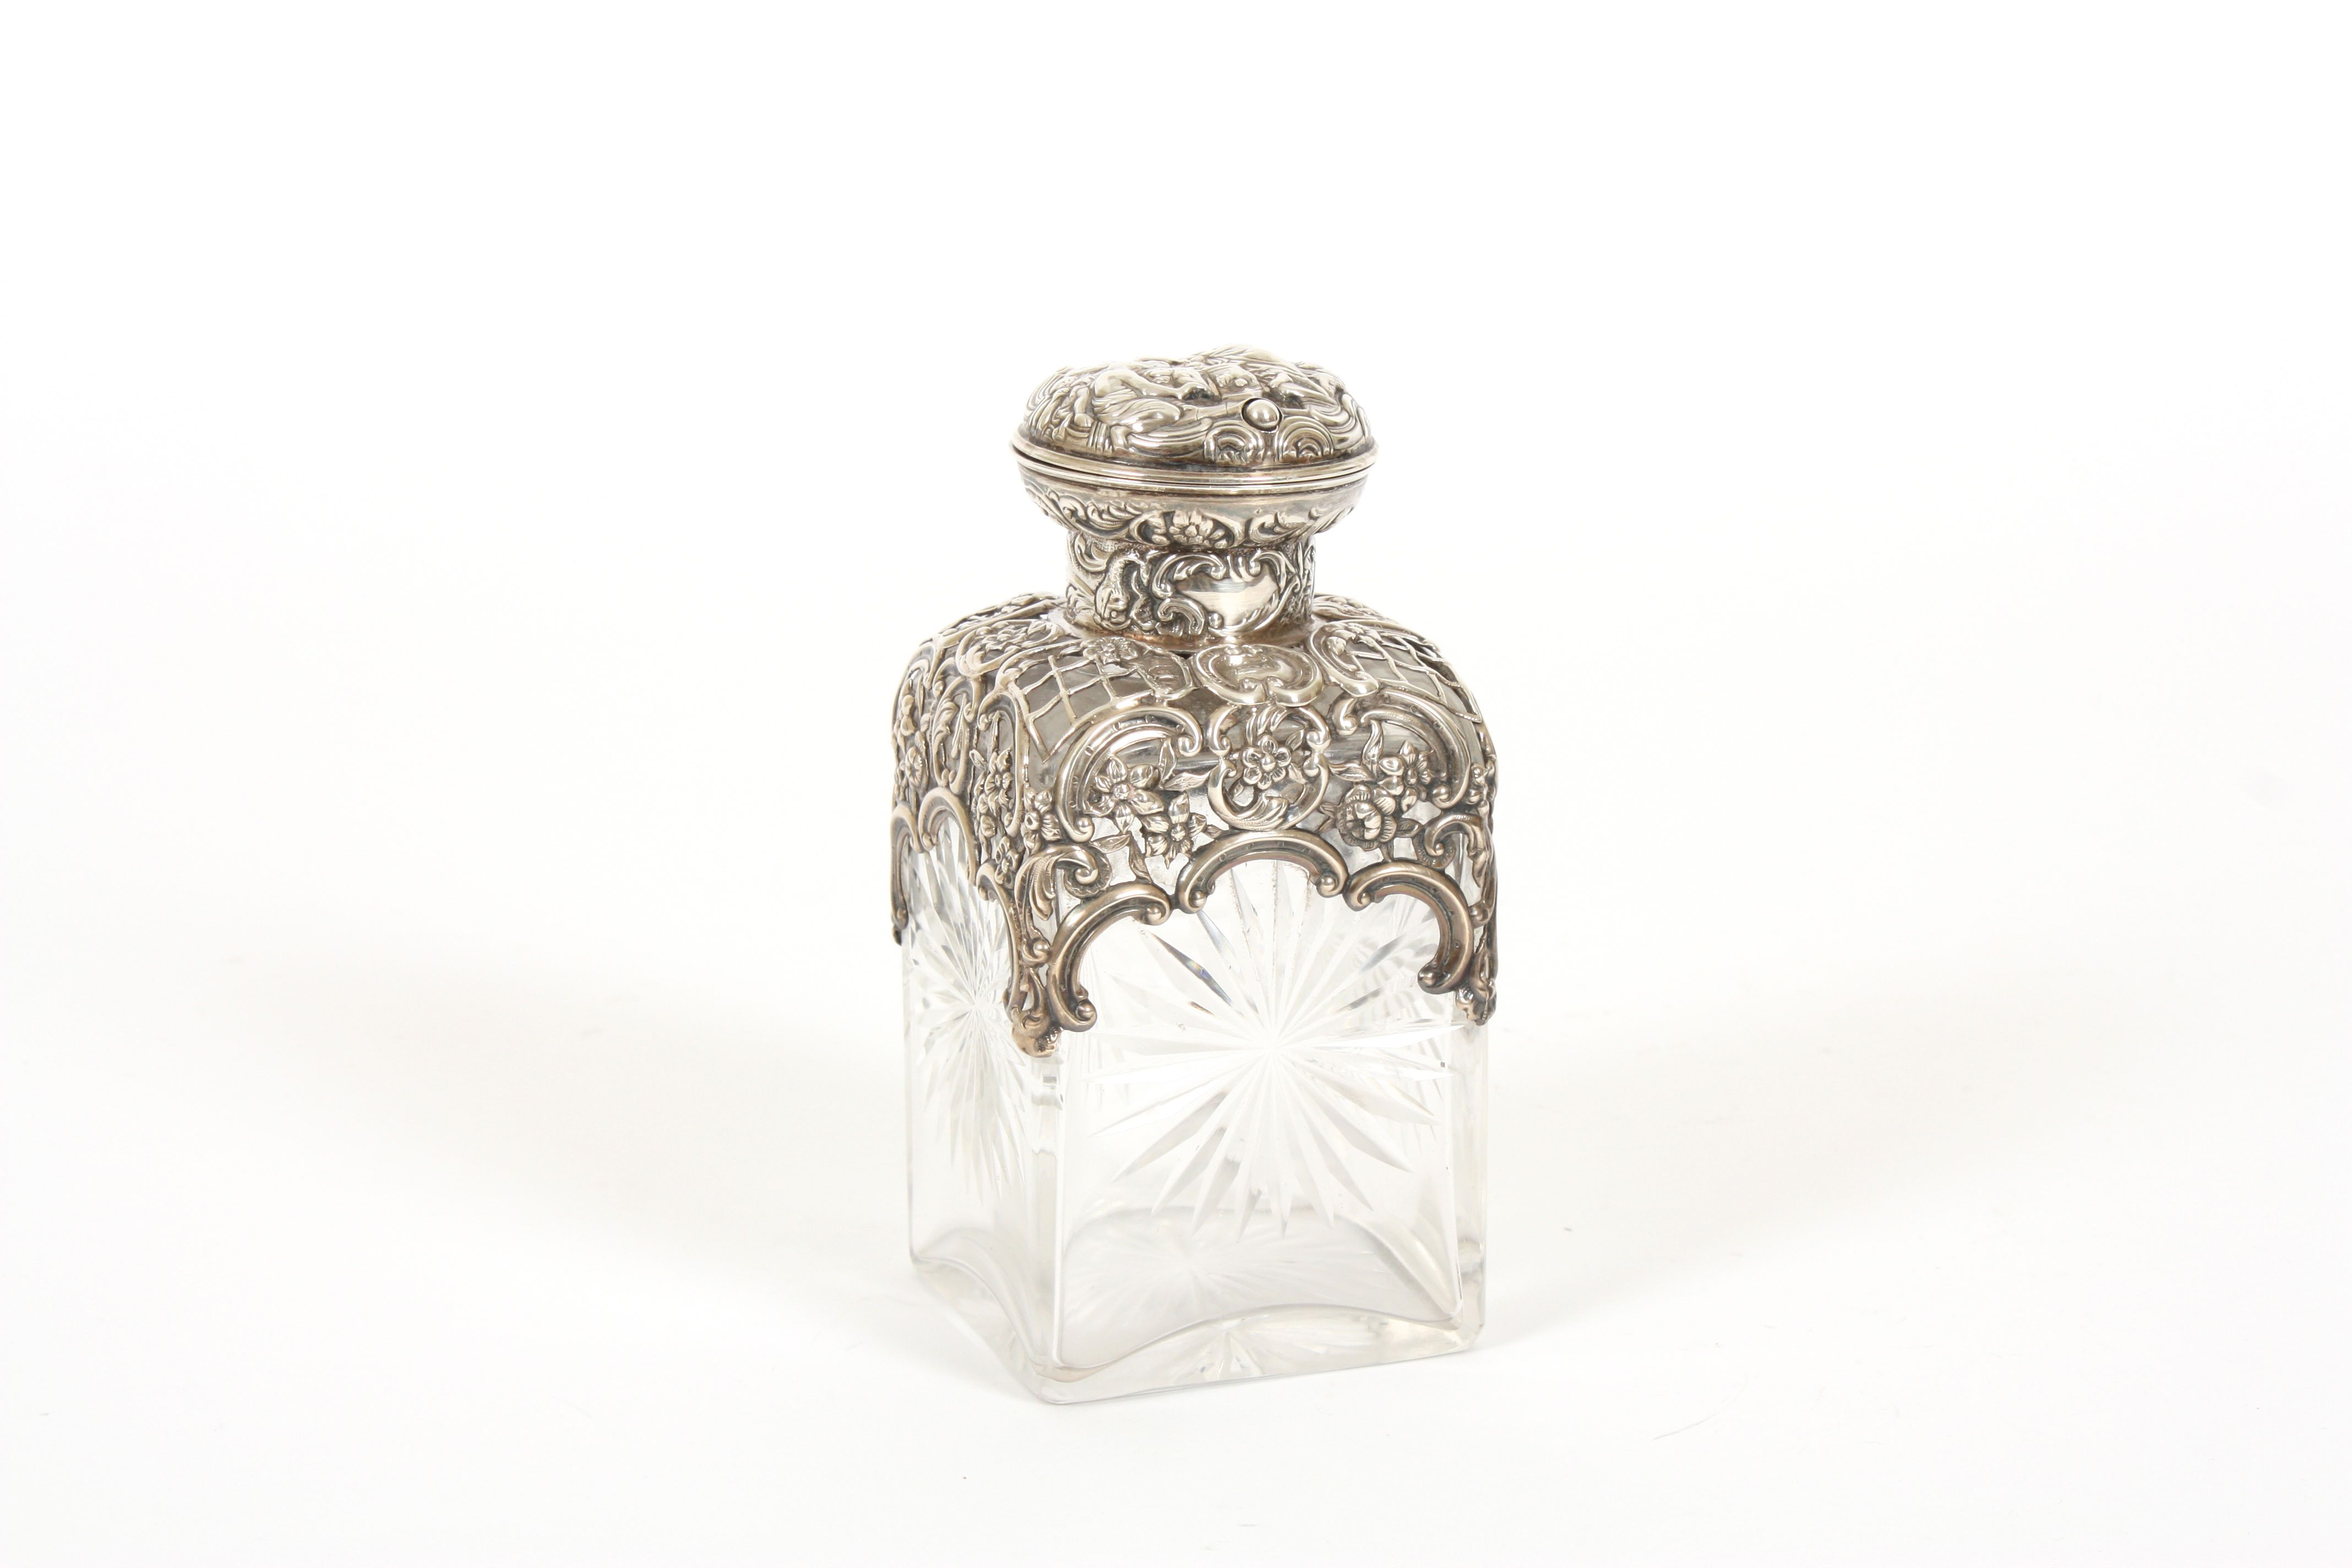 A Victorian silver and glass scent bottle by William Comyns hallmarked London 1897, the top embossed